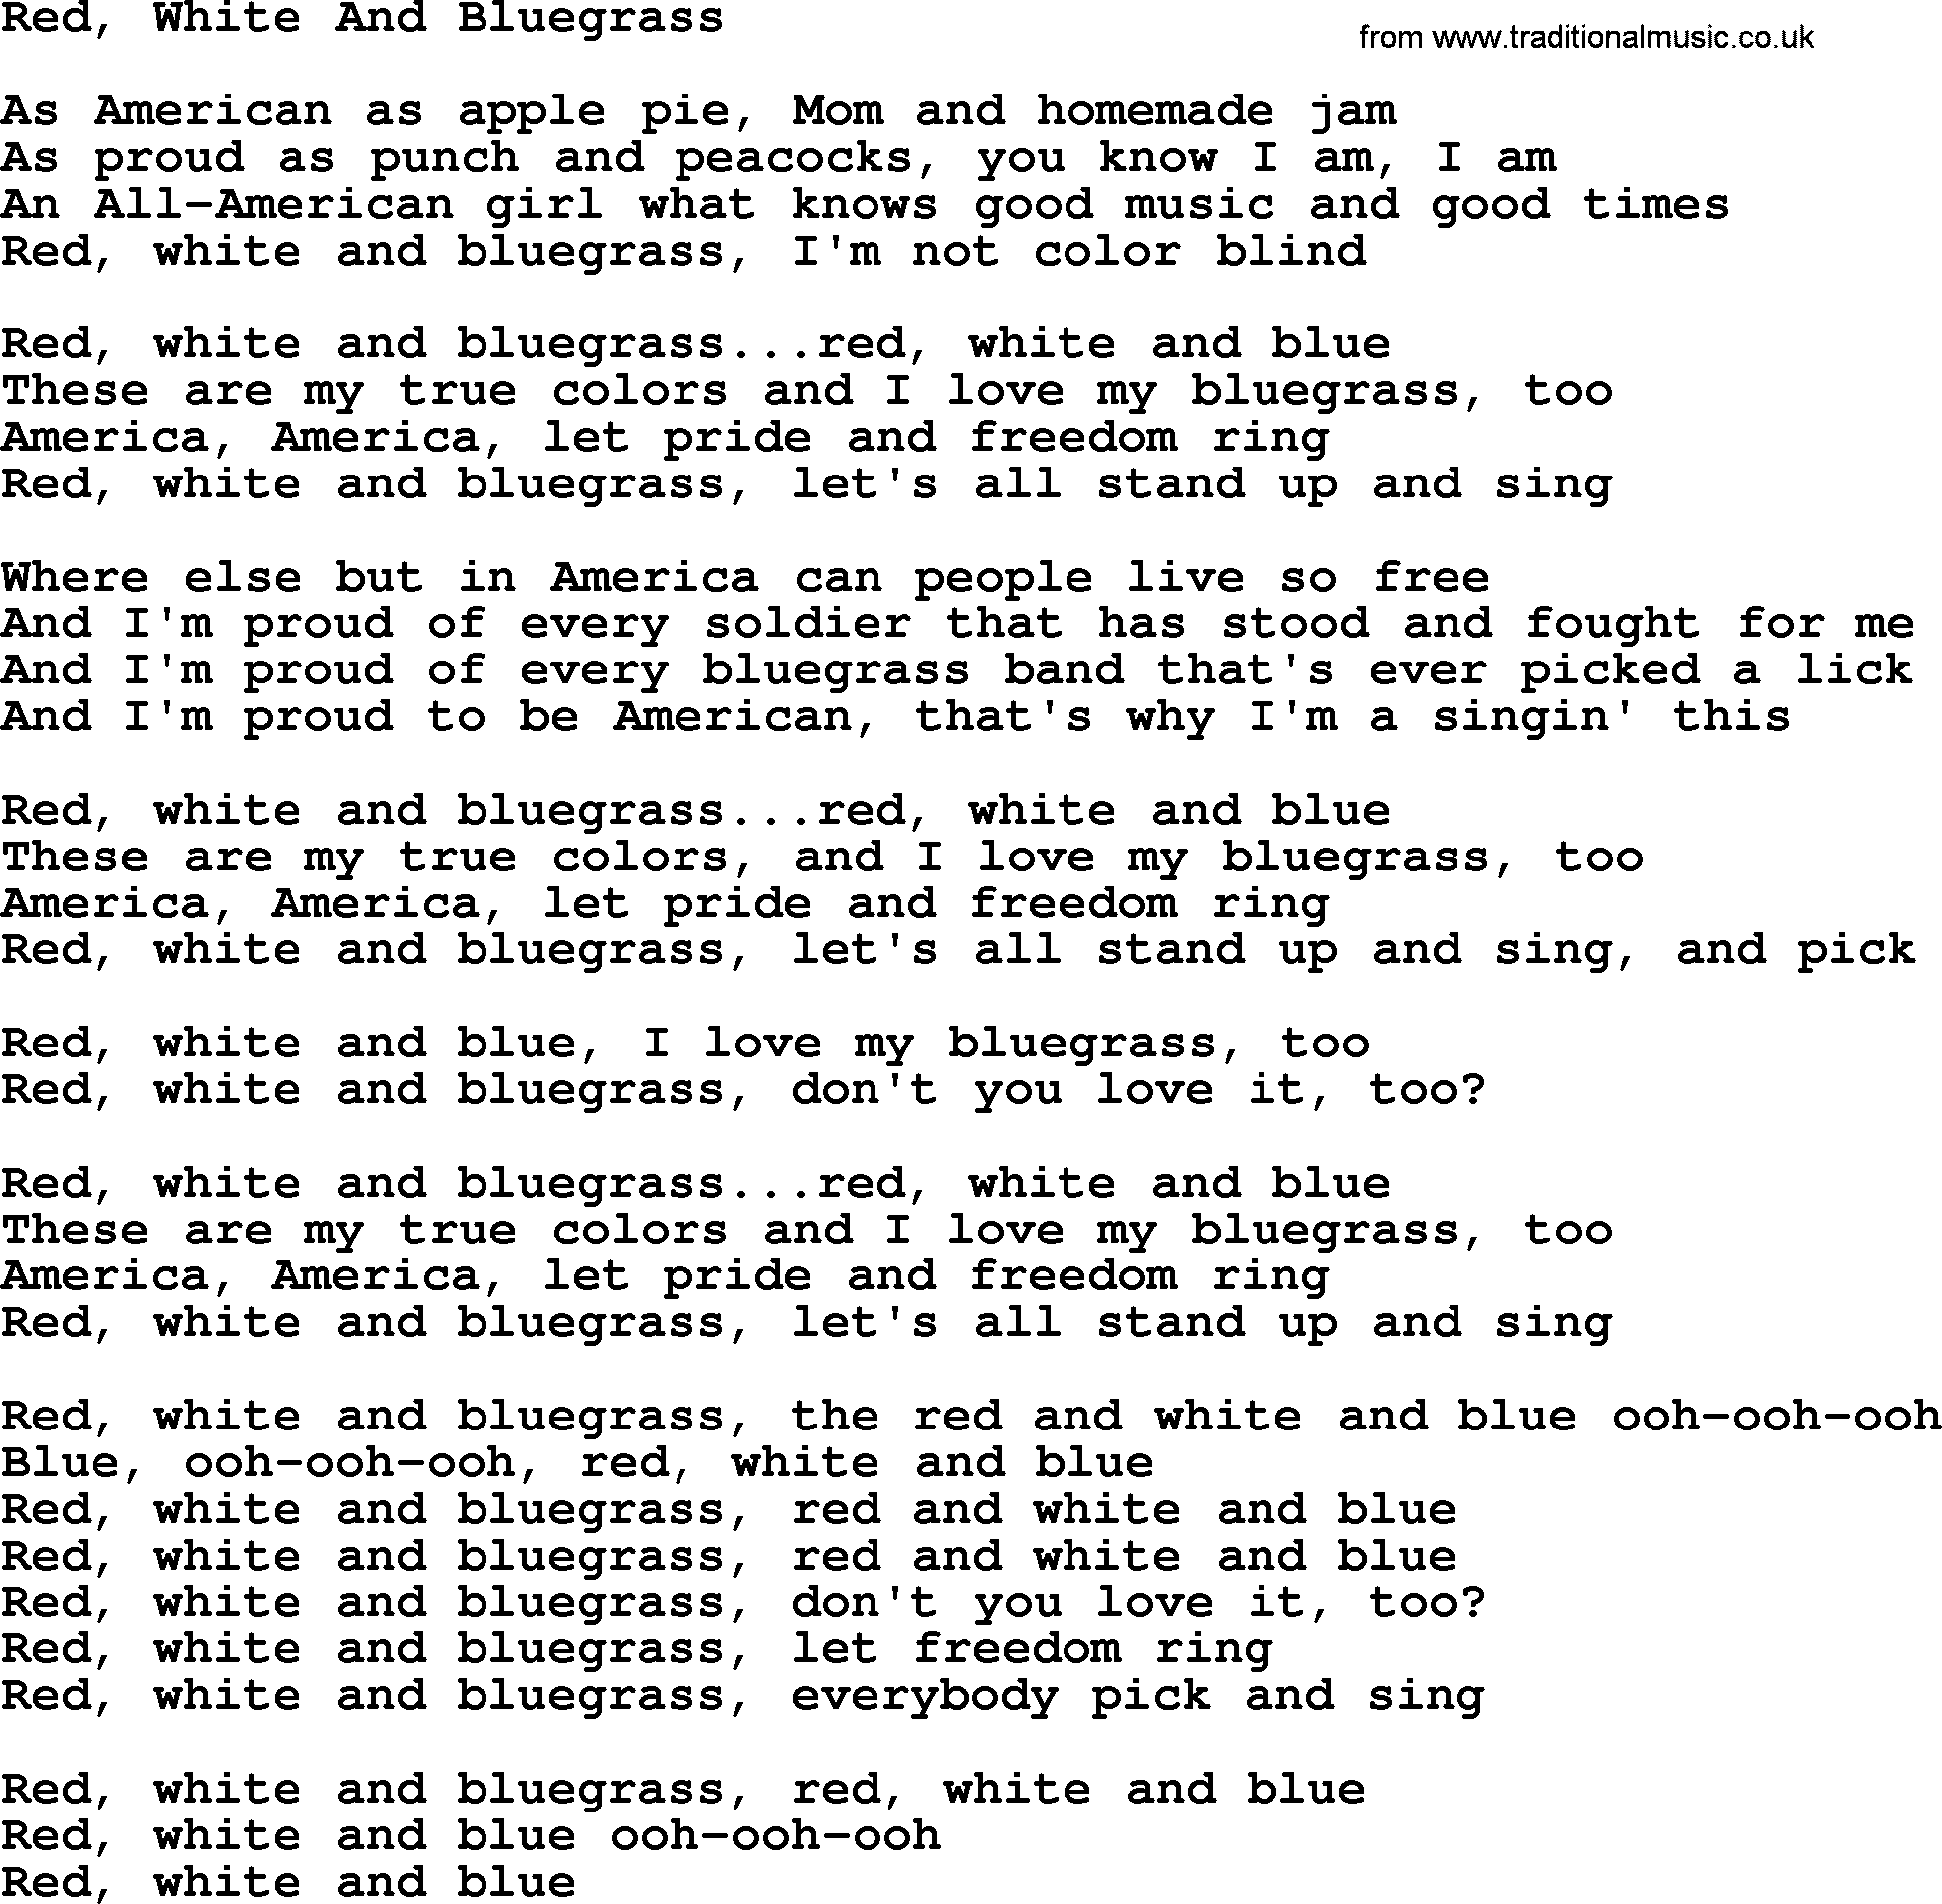 Dolly Parton song Red, White And Bluegrass.txt lyrics